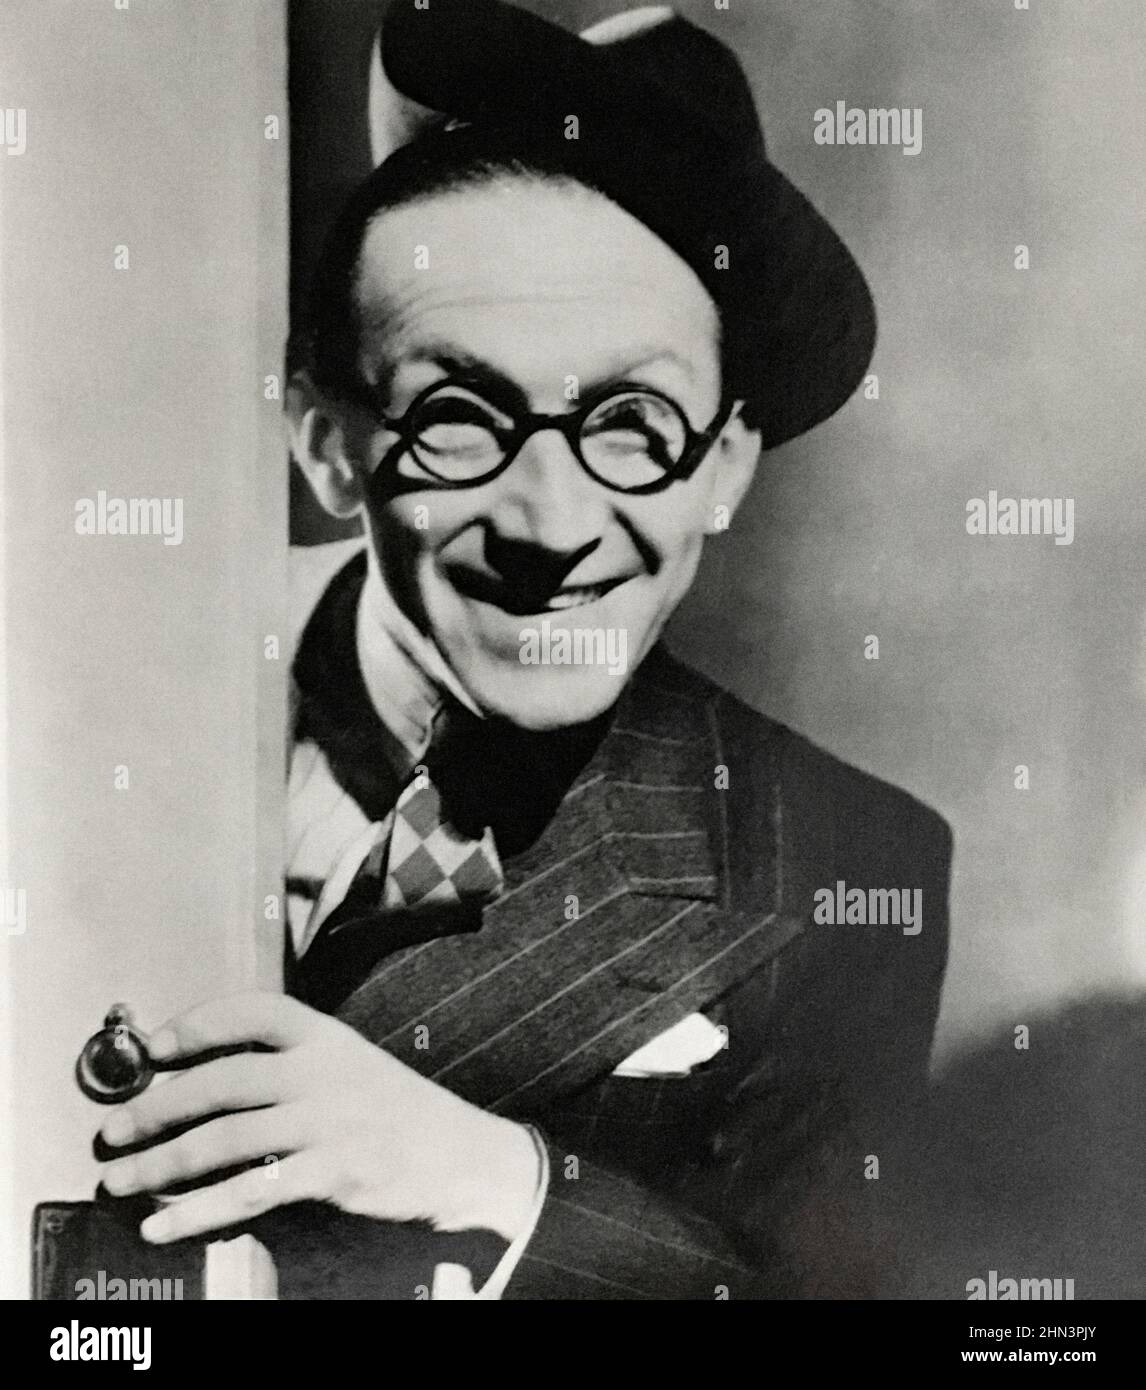 Vintage portrait of Arthur Askey from Ardath Cigarettes's cards. 1939 Stock Photo